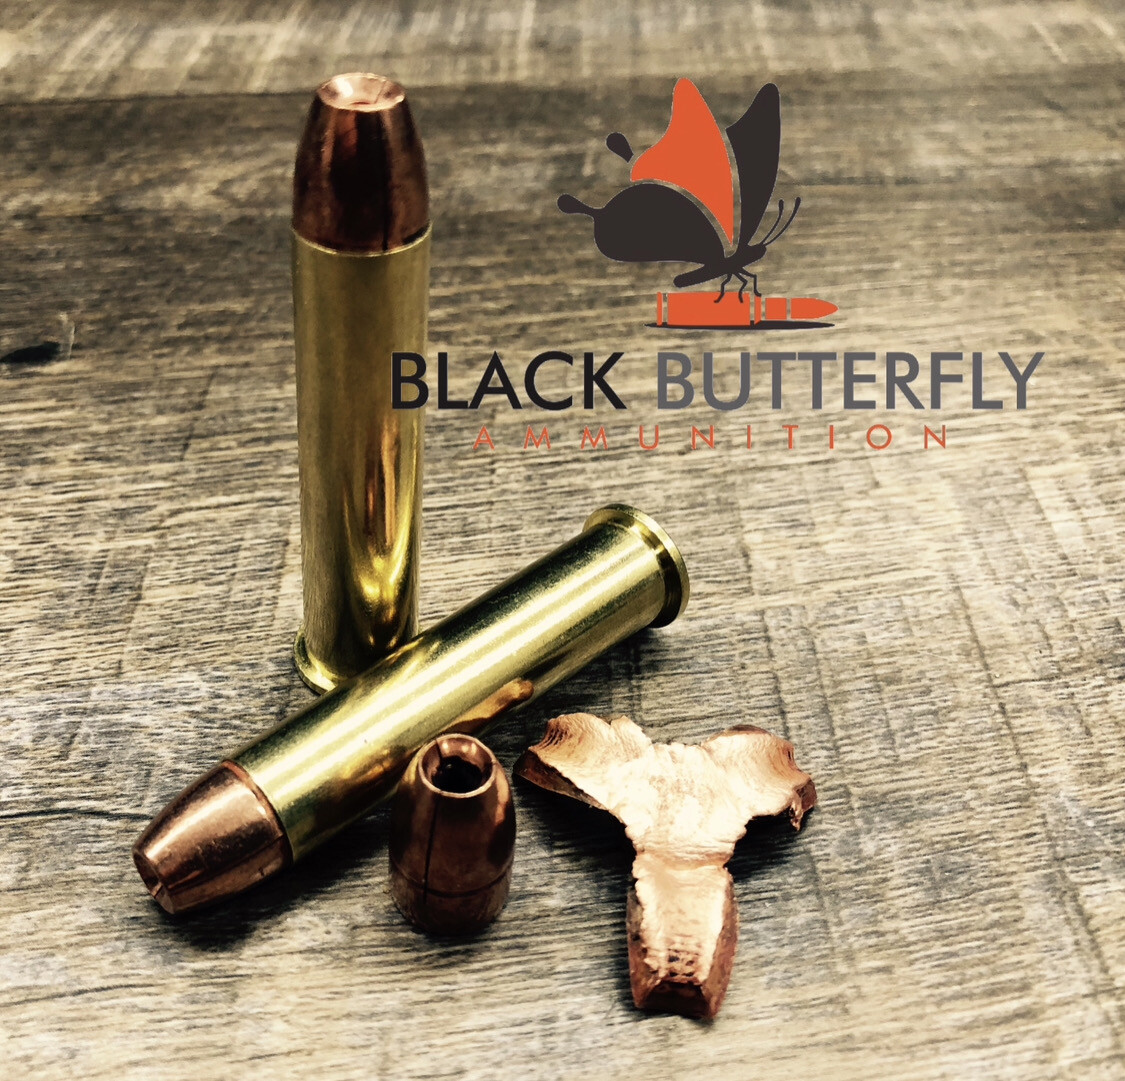 Black Butterfly Ammunition Premium, 45-70 Government, 200 gr, 20 Rounds, Maker Expanding Copper "RED CLOUD"